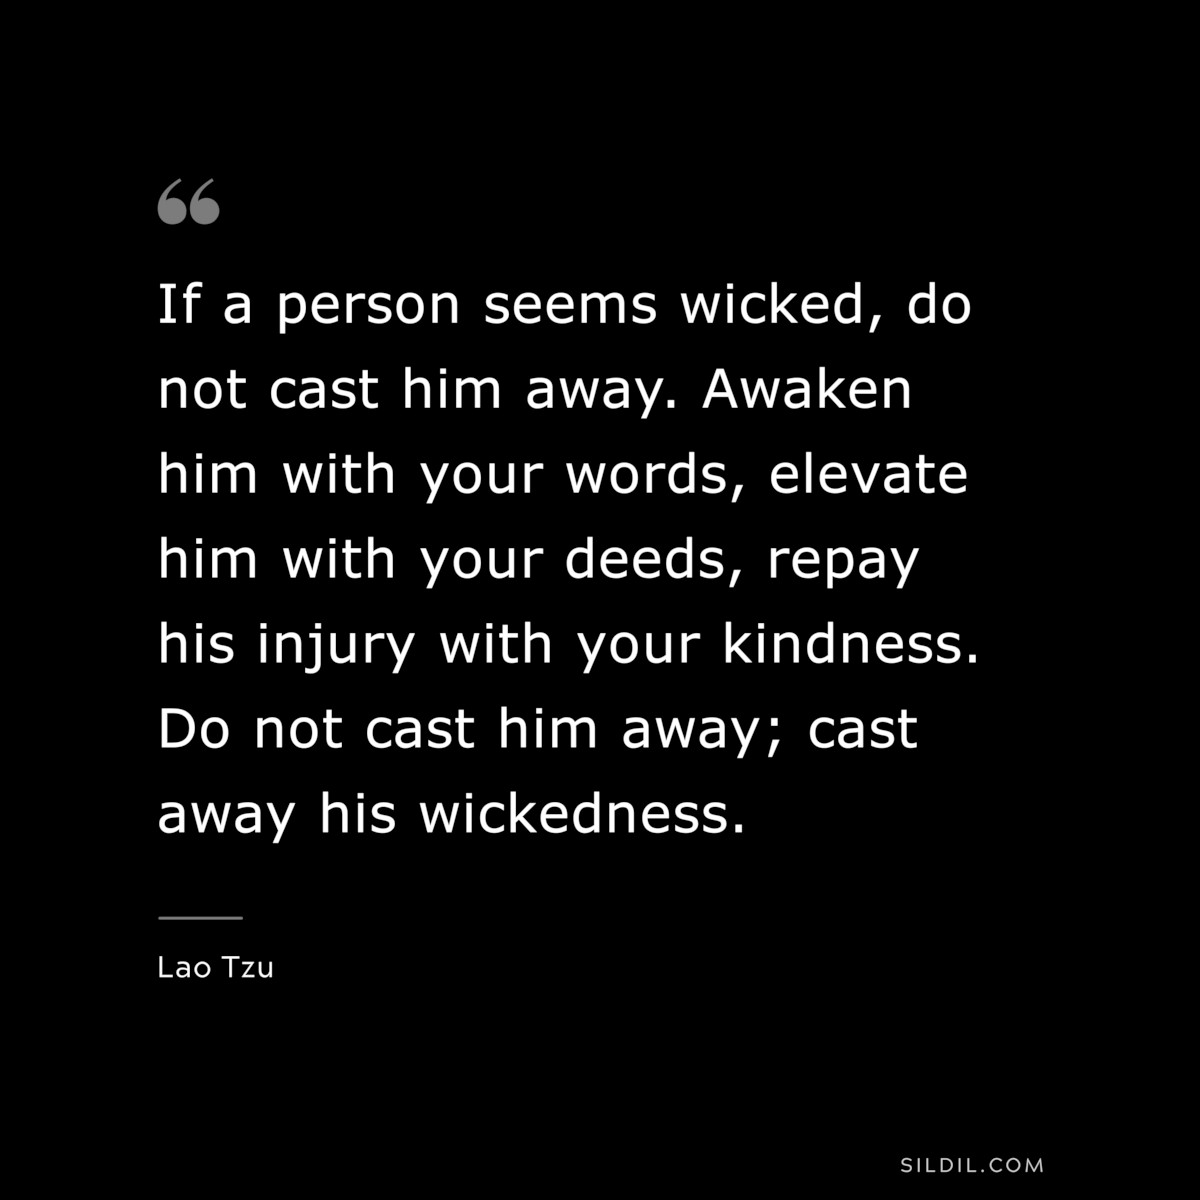 If a person seems wicked, do not cast him away. Awaken him with your words, elevate him with your deeds, repay his injury with your kindness. Do not cast him away; cast away his wickedness. ― Lao Tzu